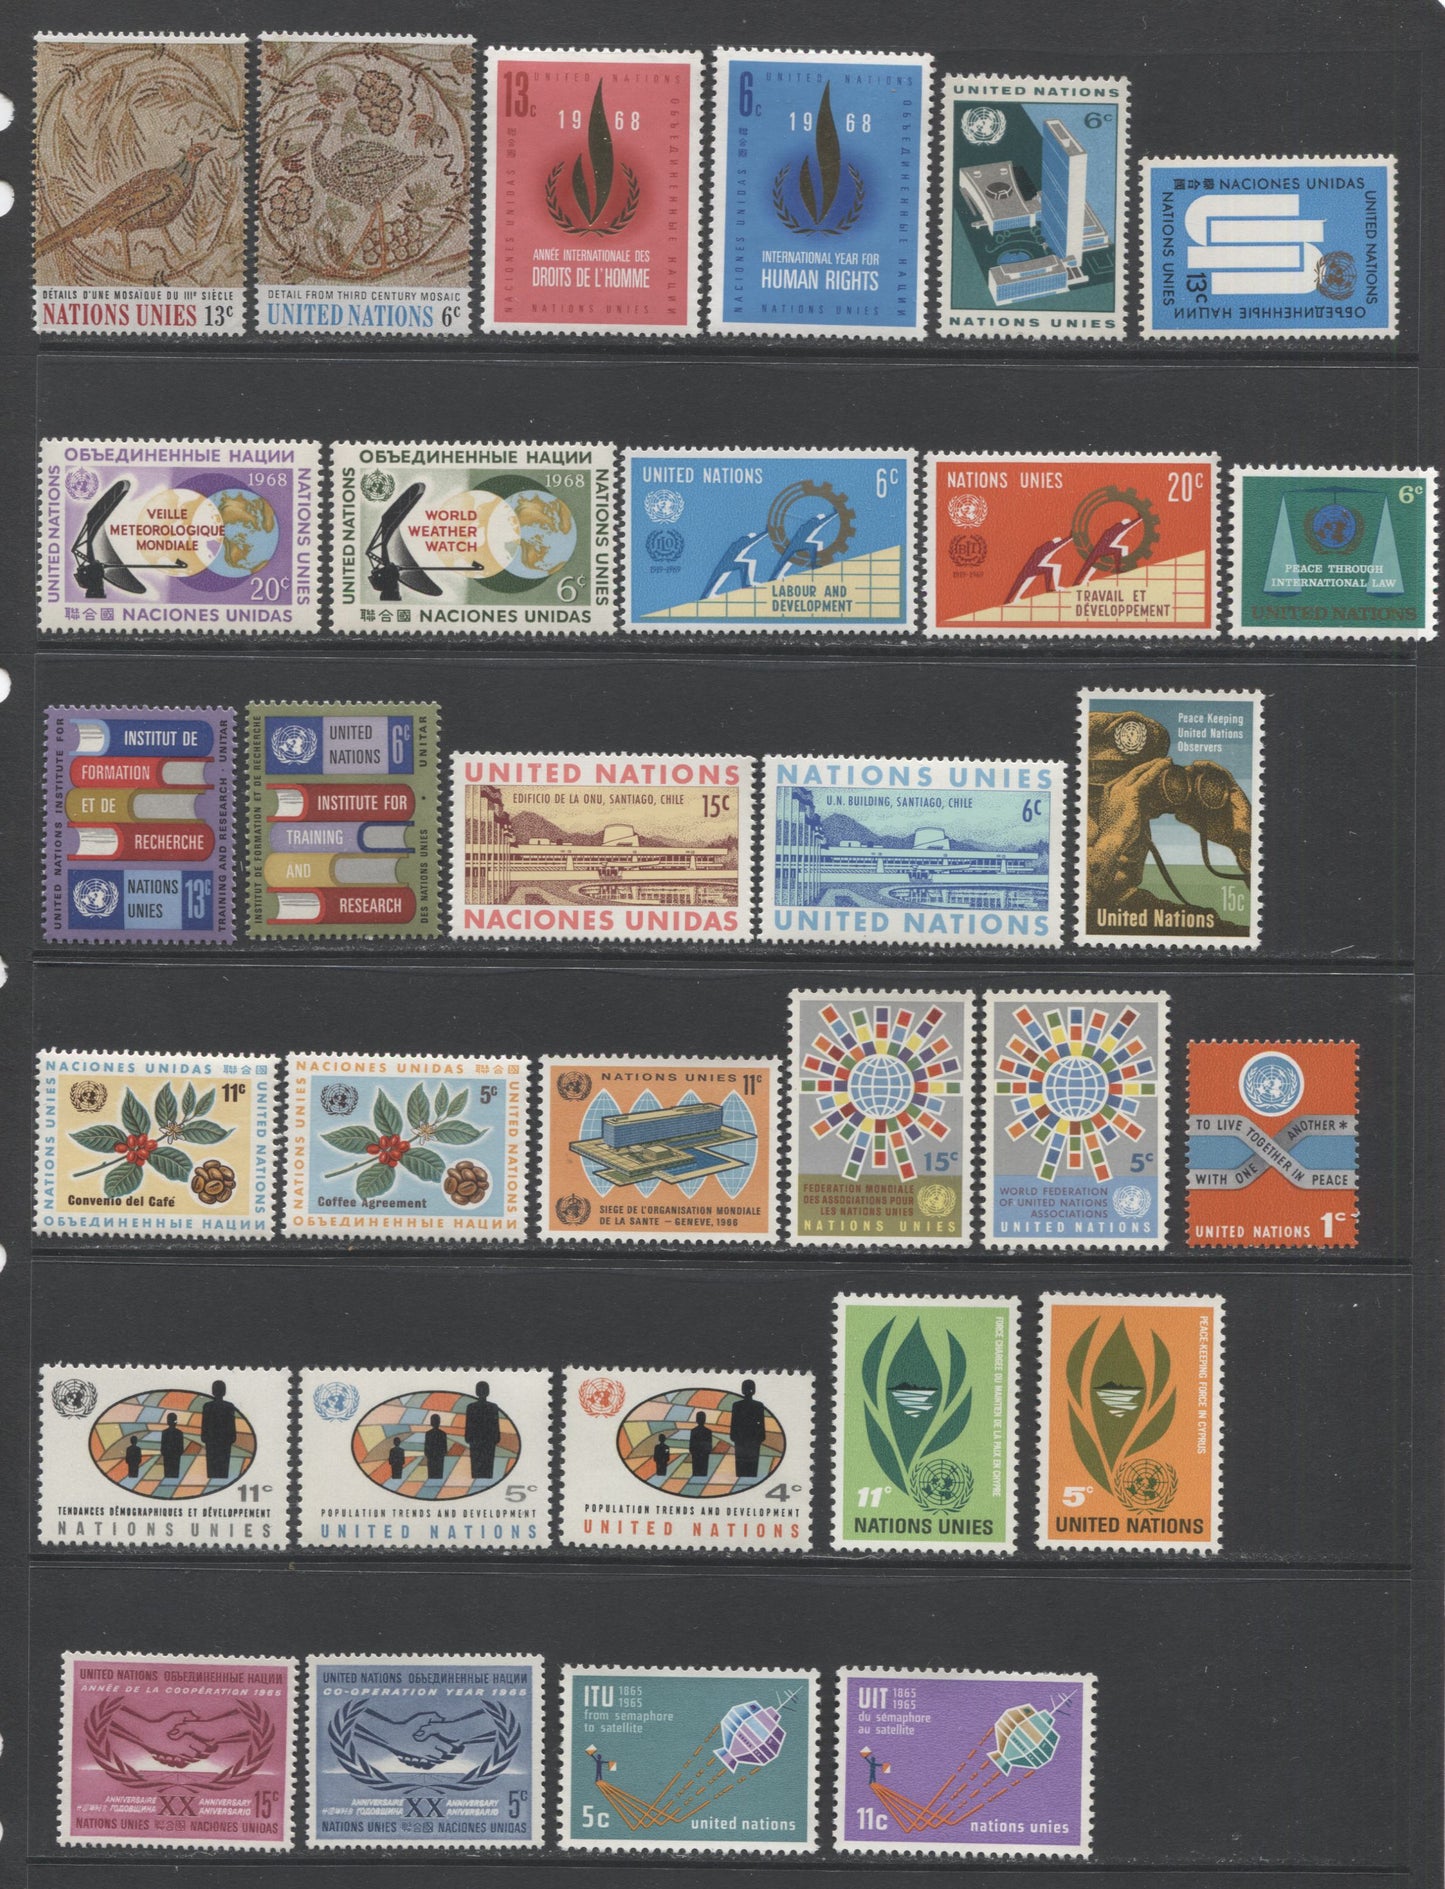 Lot 193 United Nations SC#139/202 1967-1969 Commemorative Issues, A Mostly Complete Run Of 58 Very Fine Mostly NH Examples Plus Souvenir Sheets. 2017 Scott Cat. $14.90 USD, Click on Listing to See ALL Pictures